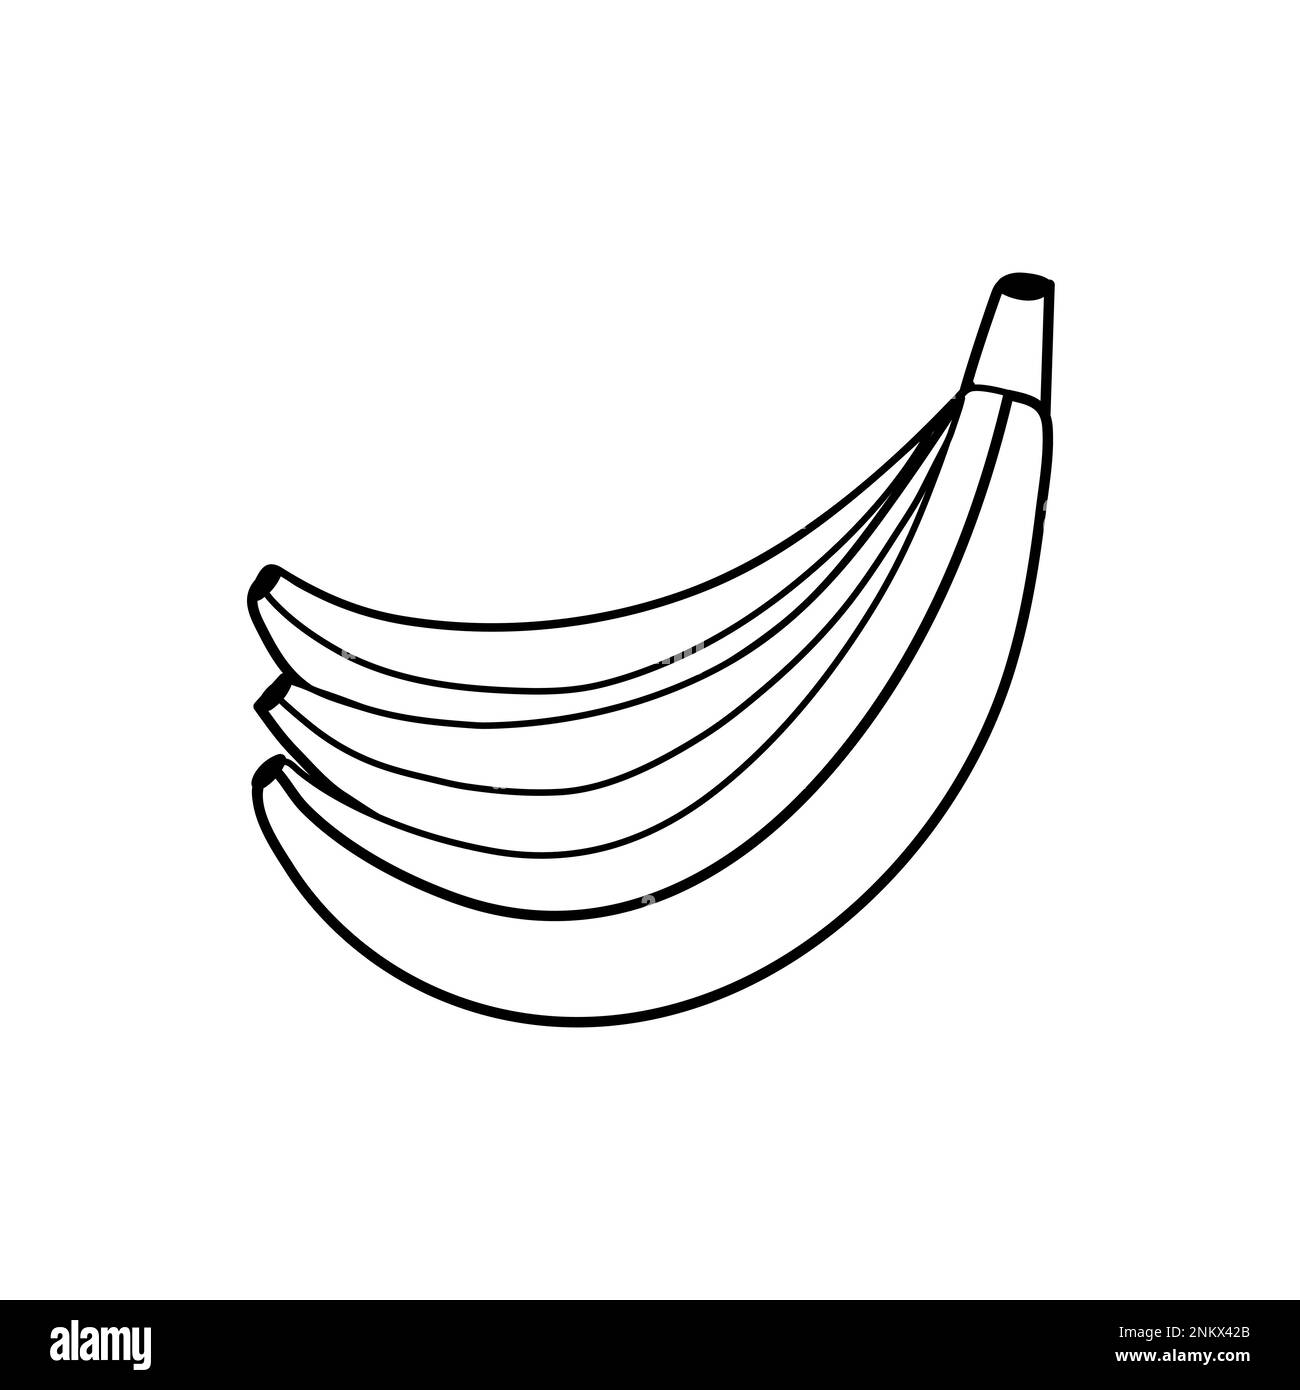 Black and white banana isolated on white background. Linear fruit for coloring book Stock Vector